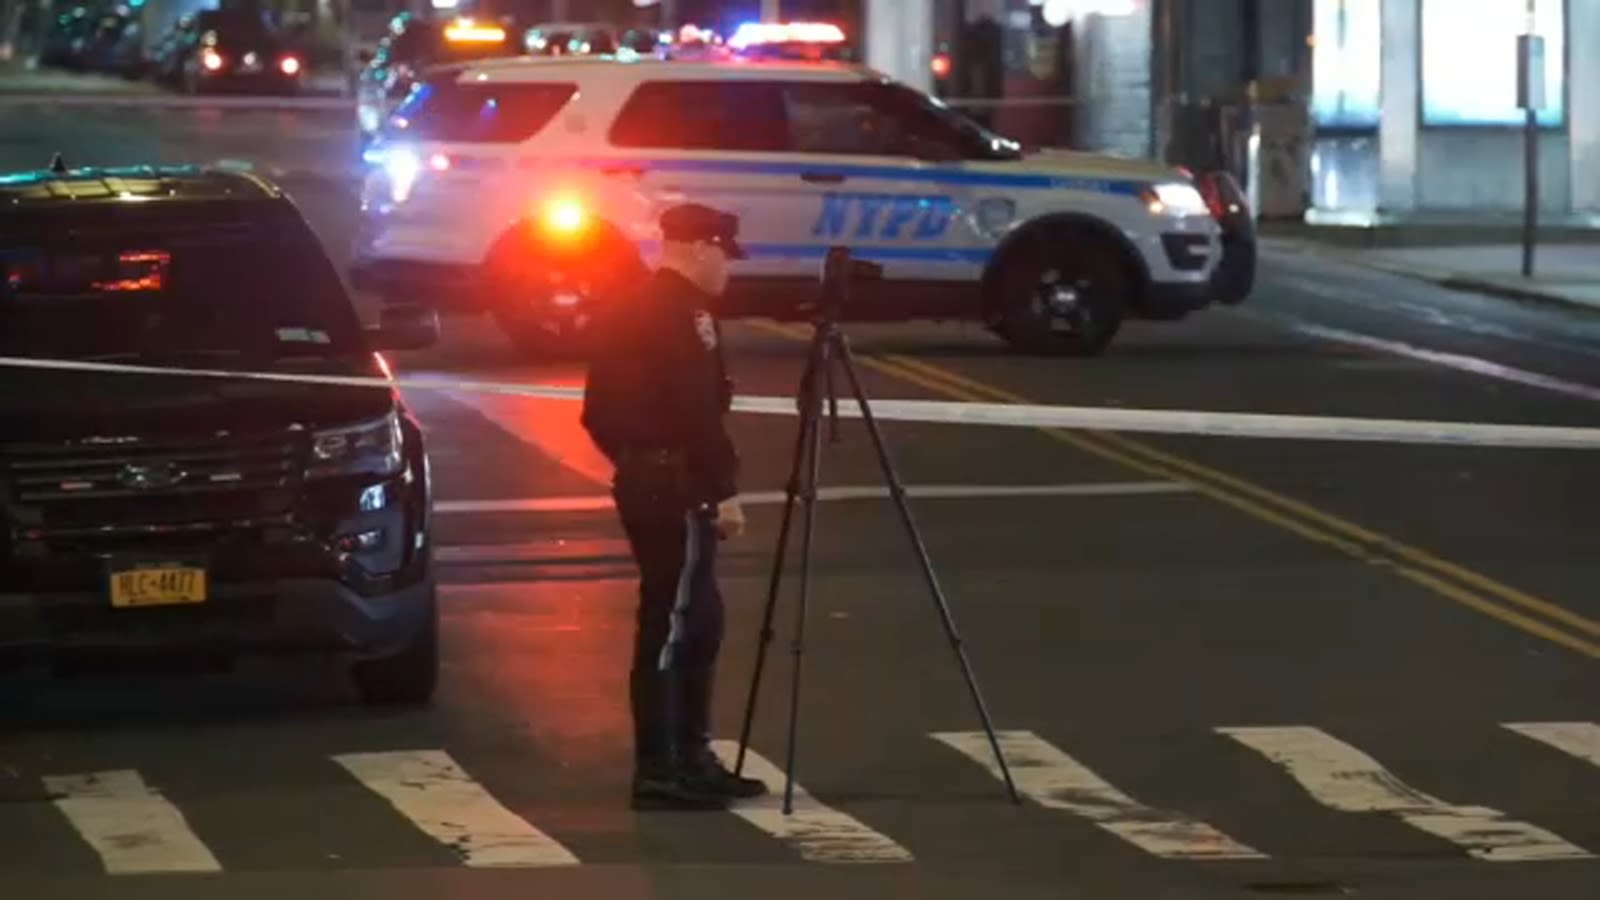 Police investigate separate hit-and-run crashes within hours in Queens